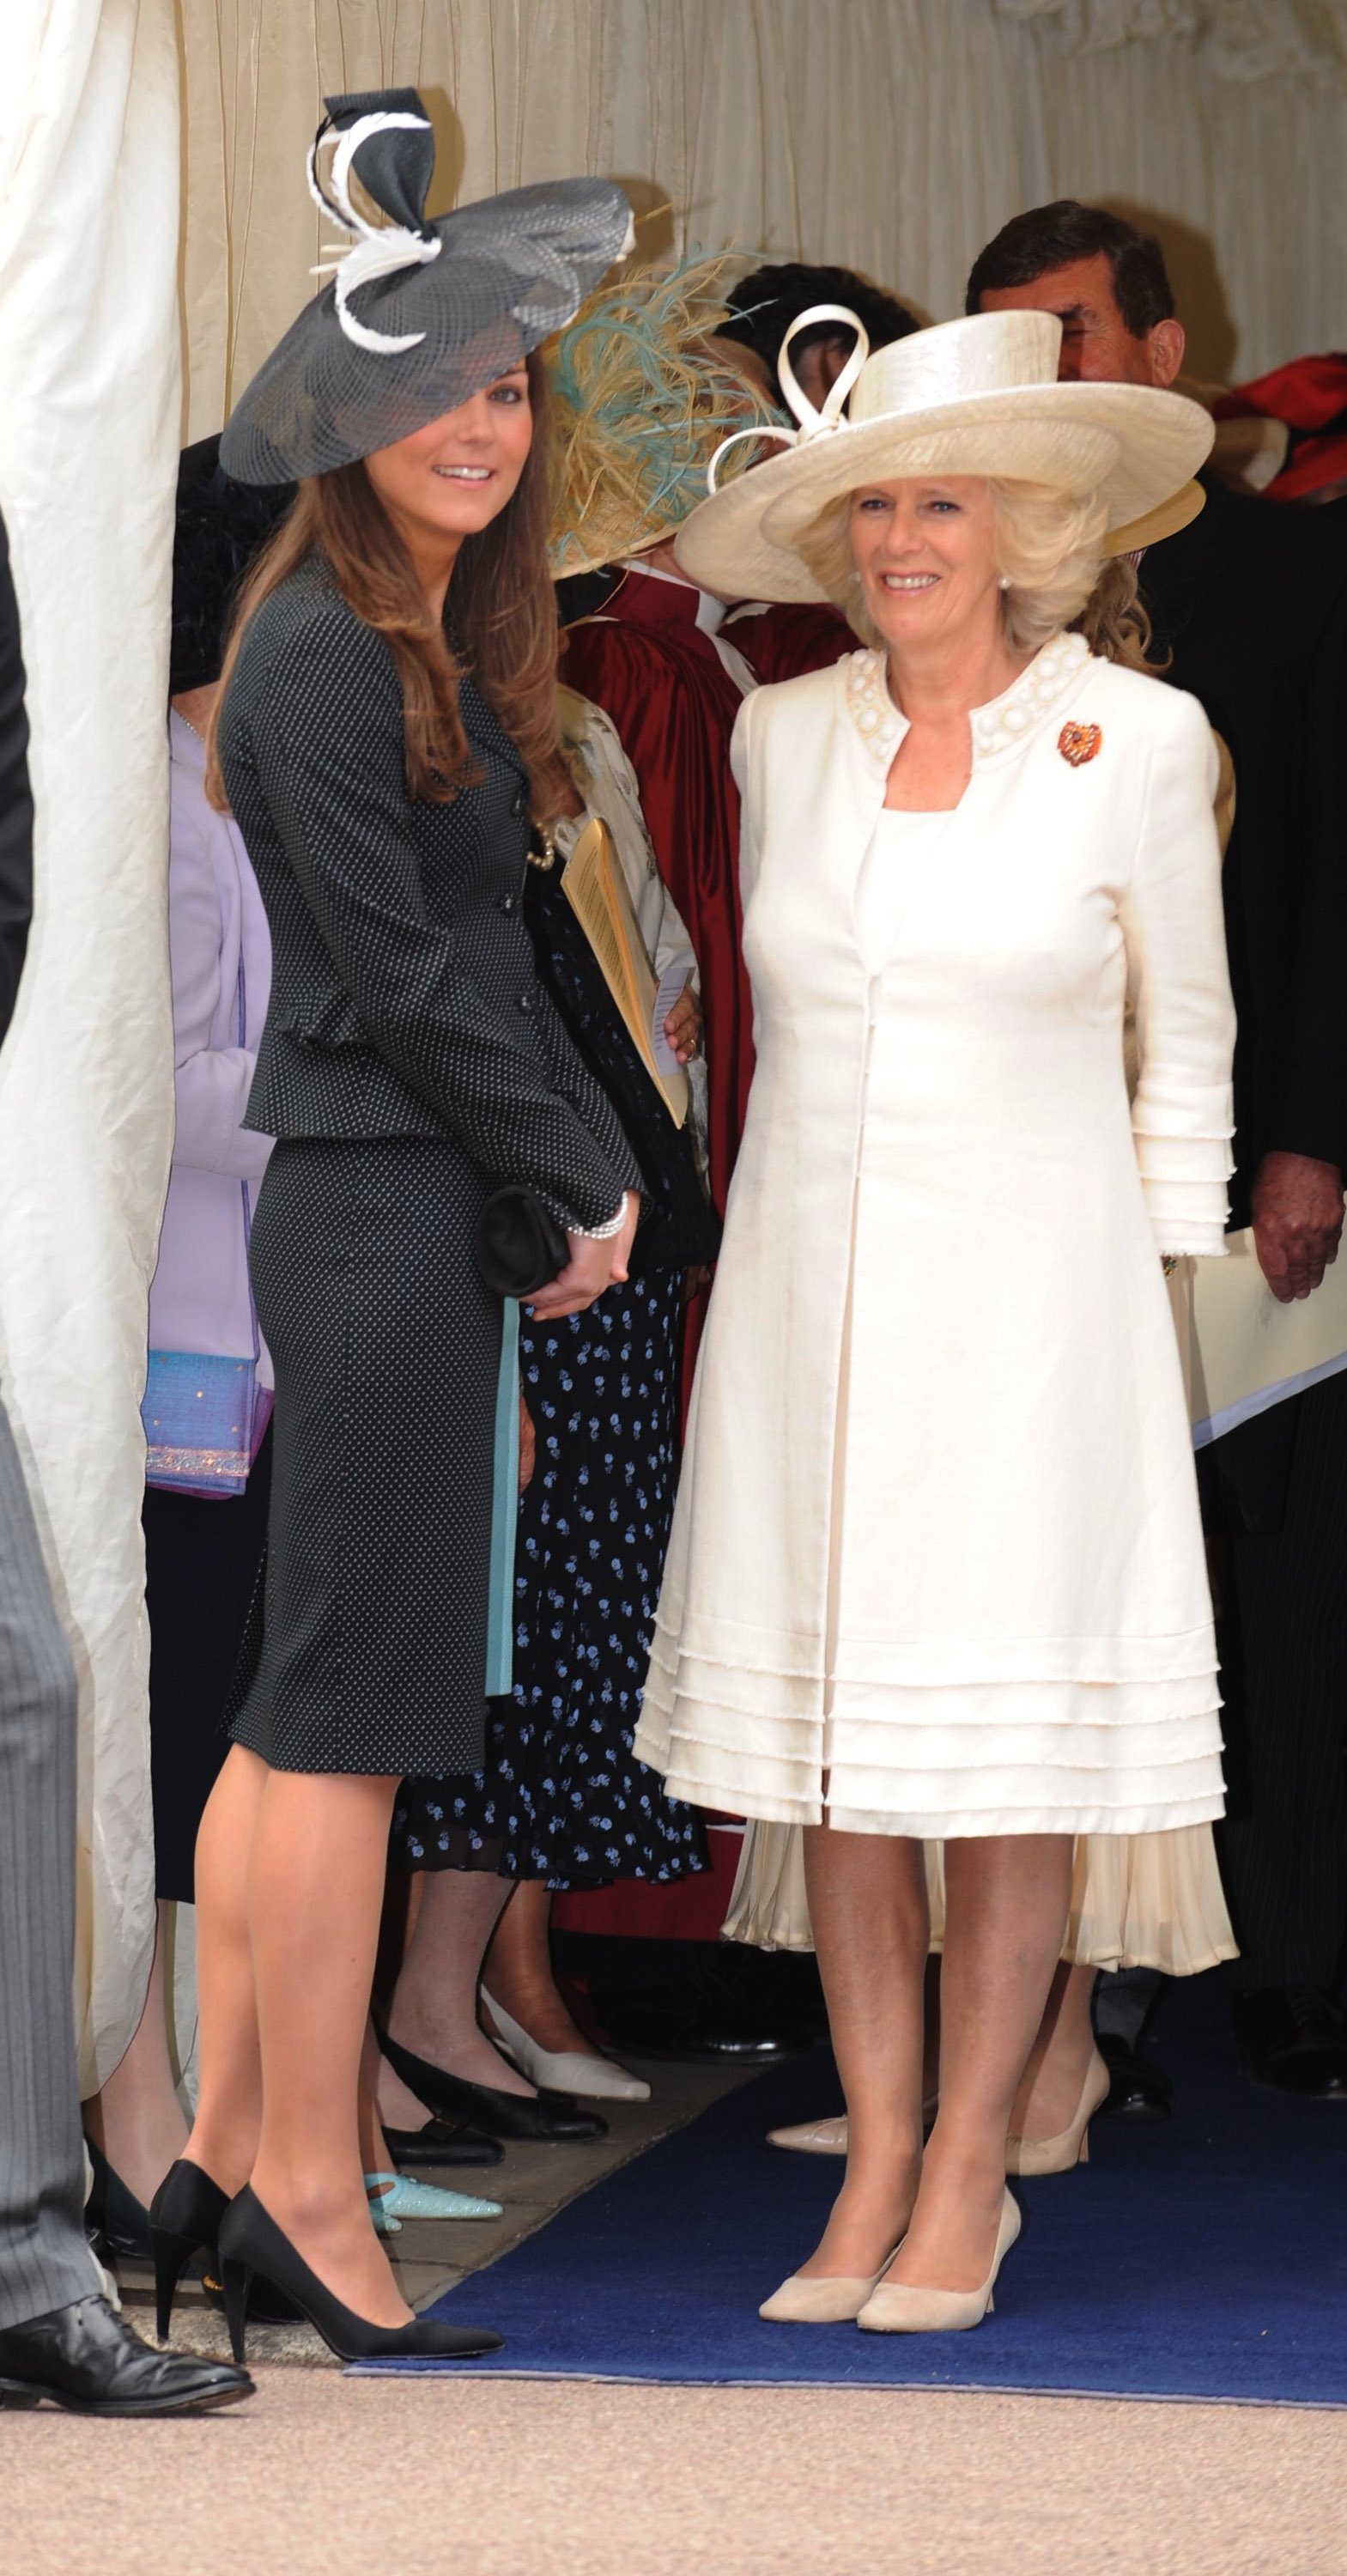 Kate Middleton joins Camilla, now Queen Consort, at St George's Chapel, Windsor Castle on June 16, 2008 in Windsor, England | Source: Getty Images